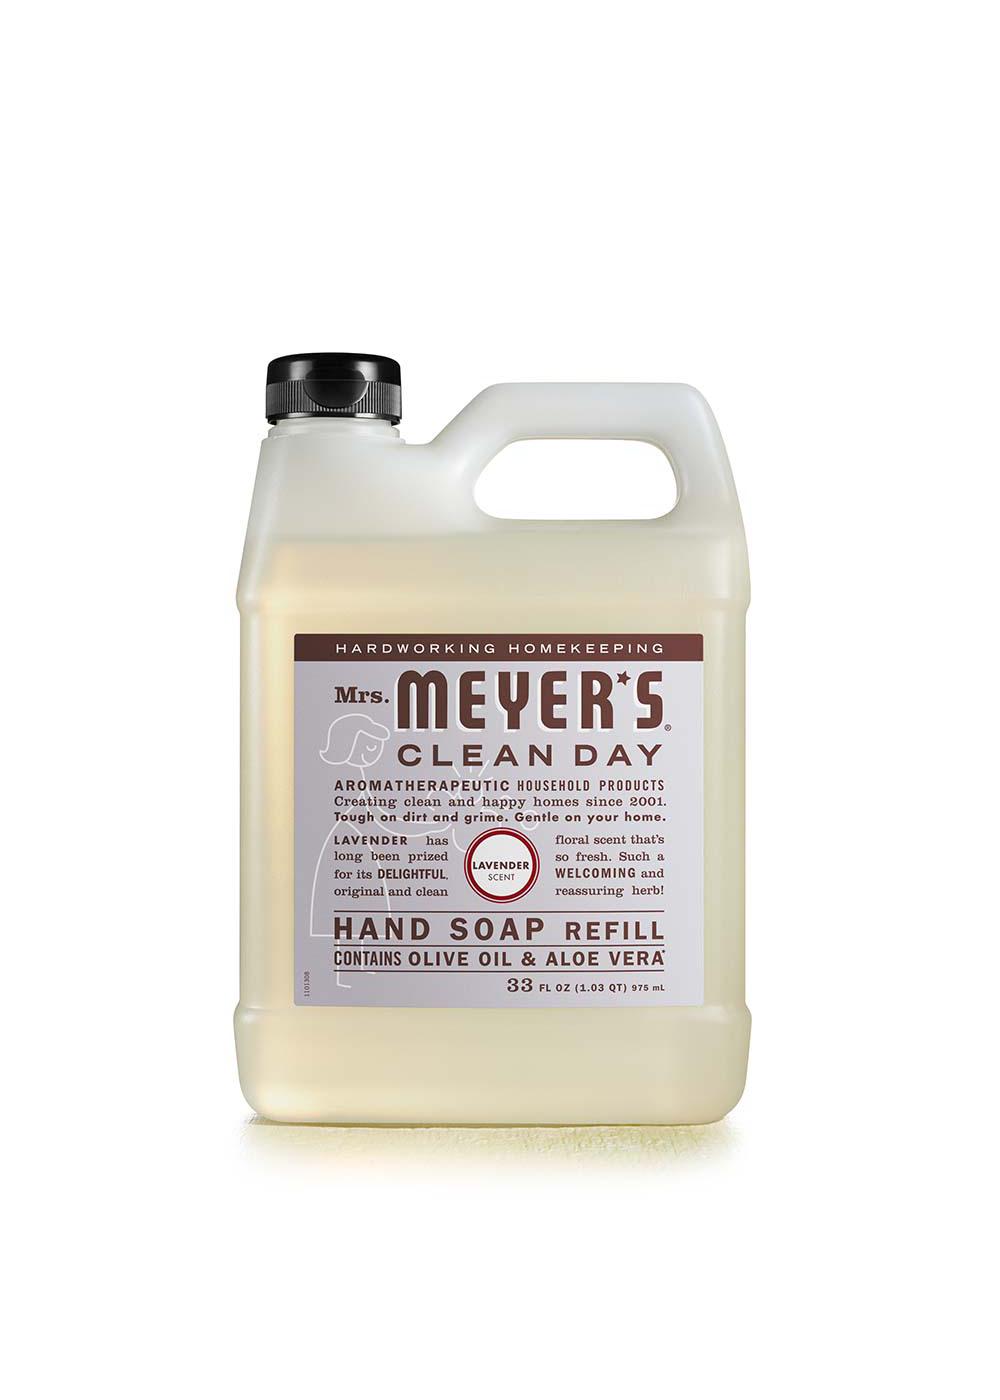 Mrs. Meyer's Clean Day Lavender Hand Soap Refill; image 1 of 5